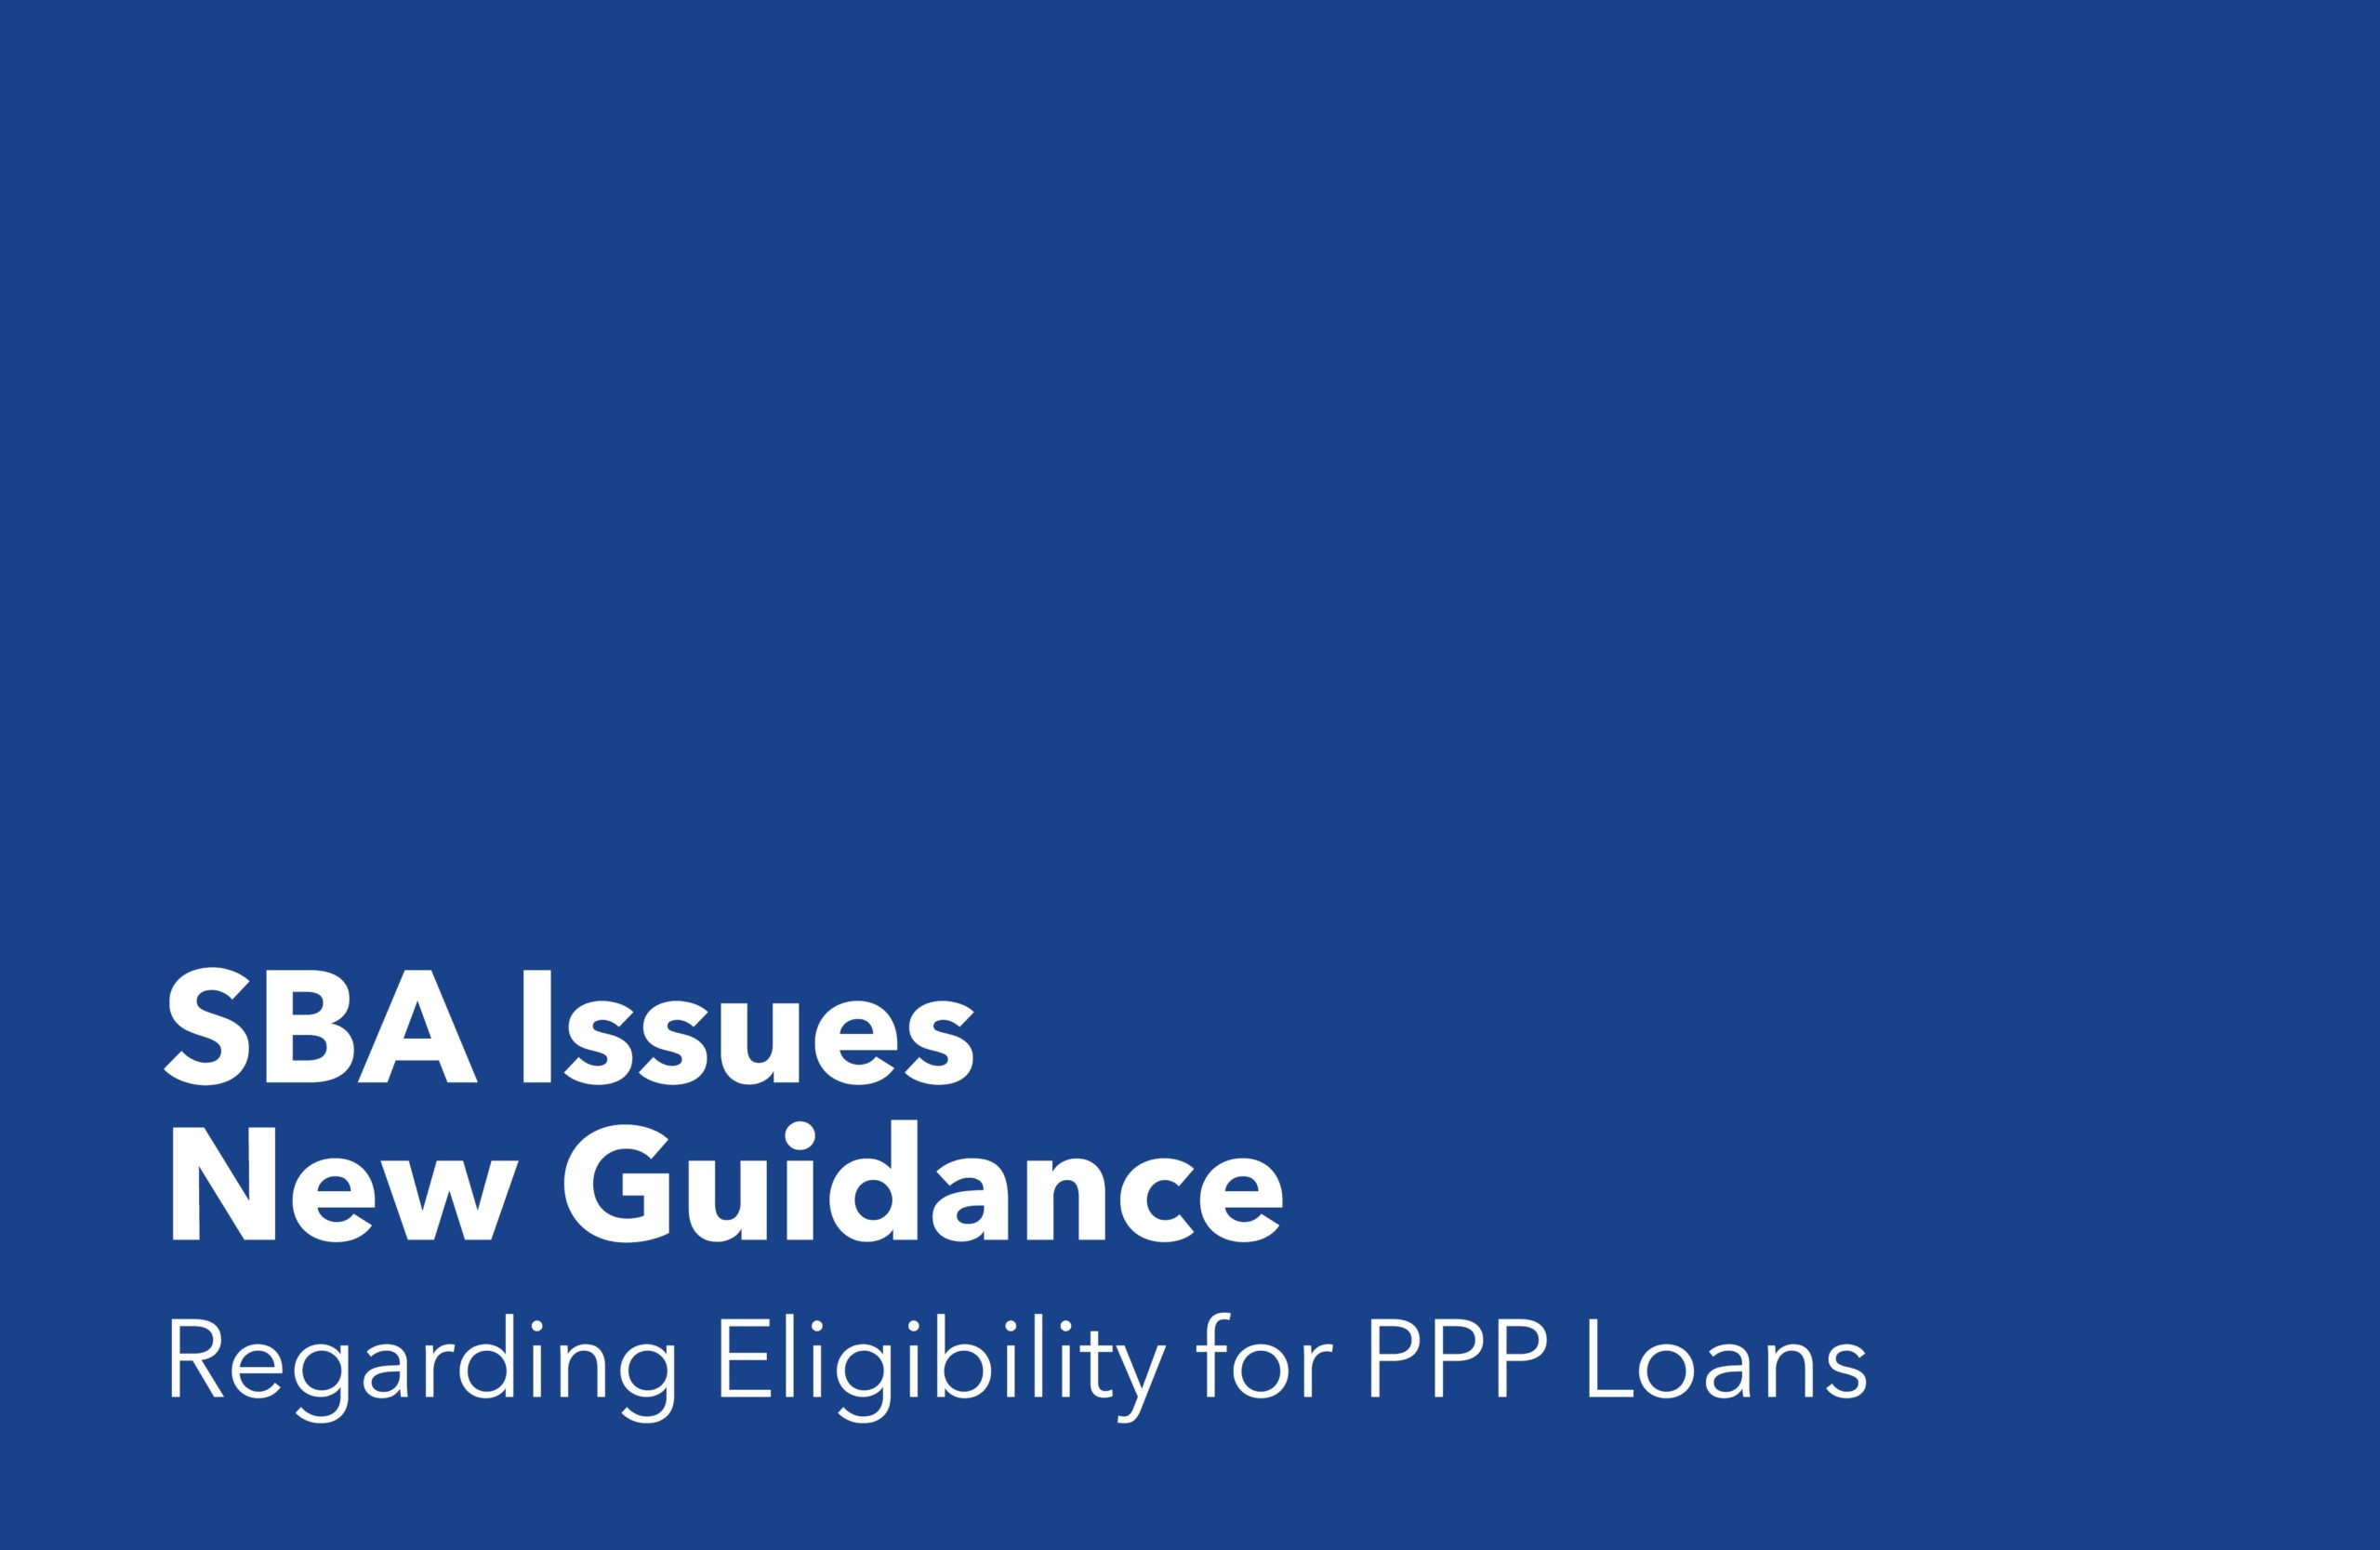 SBA Issues New Guidance Regarding Eligibility for PPP Loans